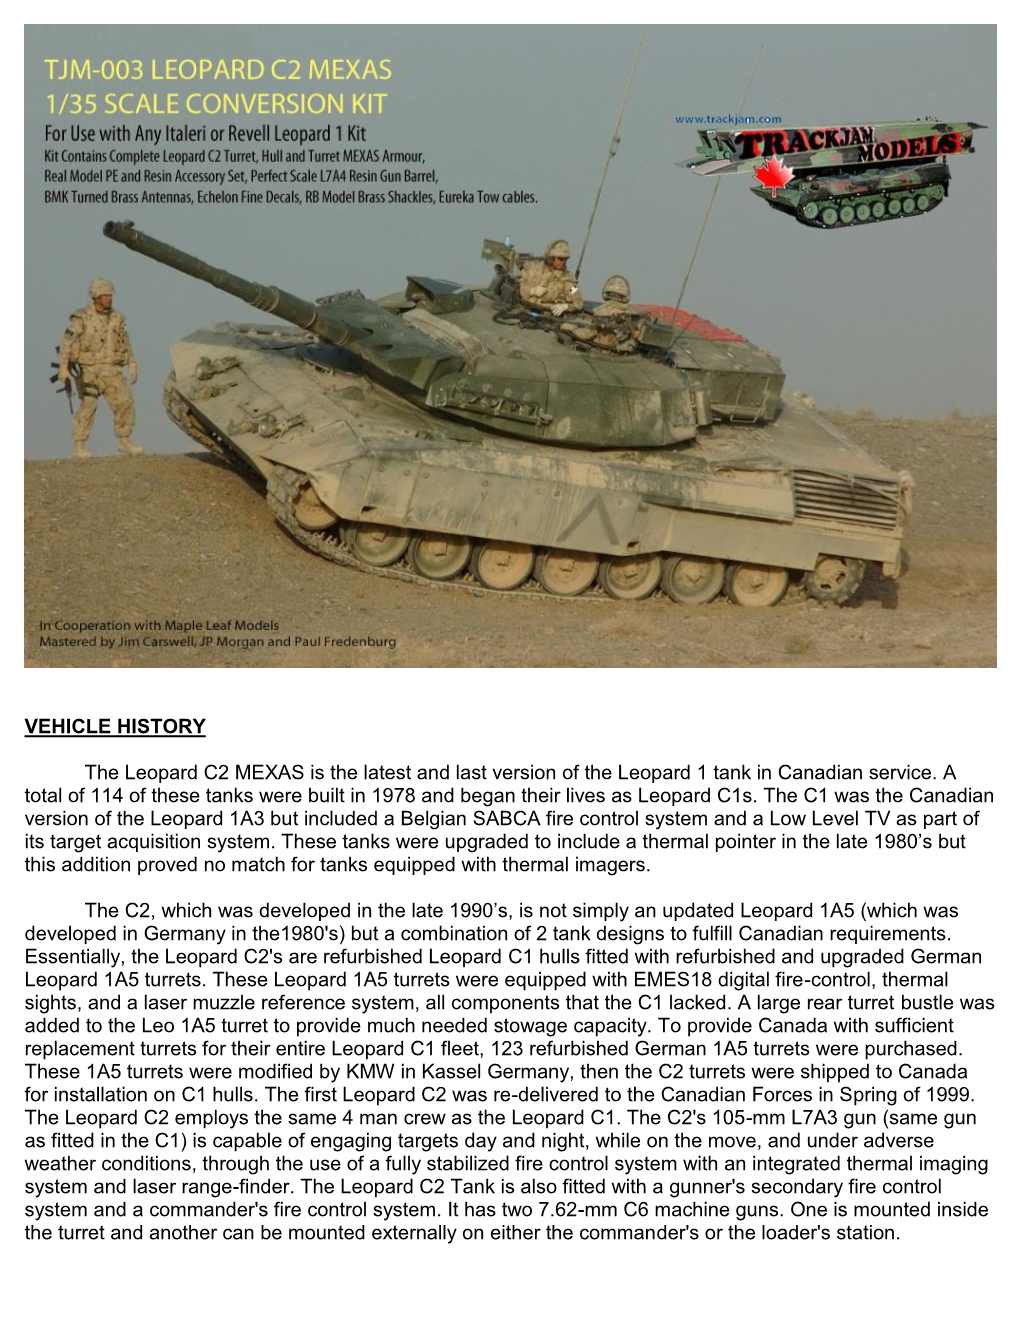 The Leopard C2 MEXAS Is the Latest and Last Version of the Leopard 1 Tank in Canadian Service